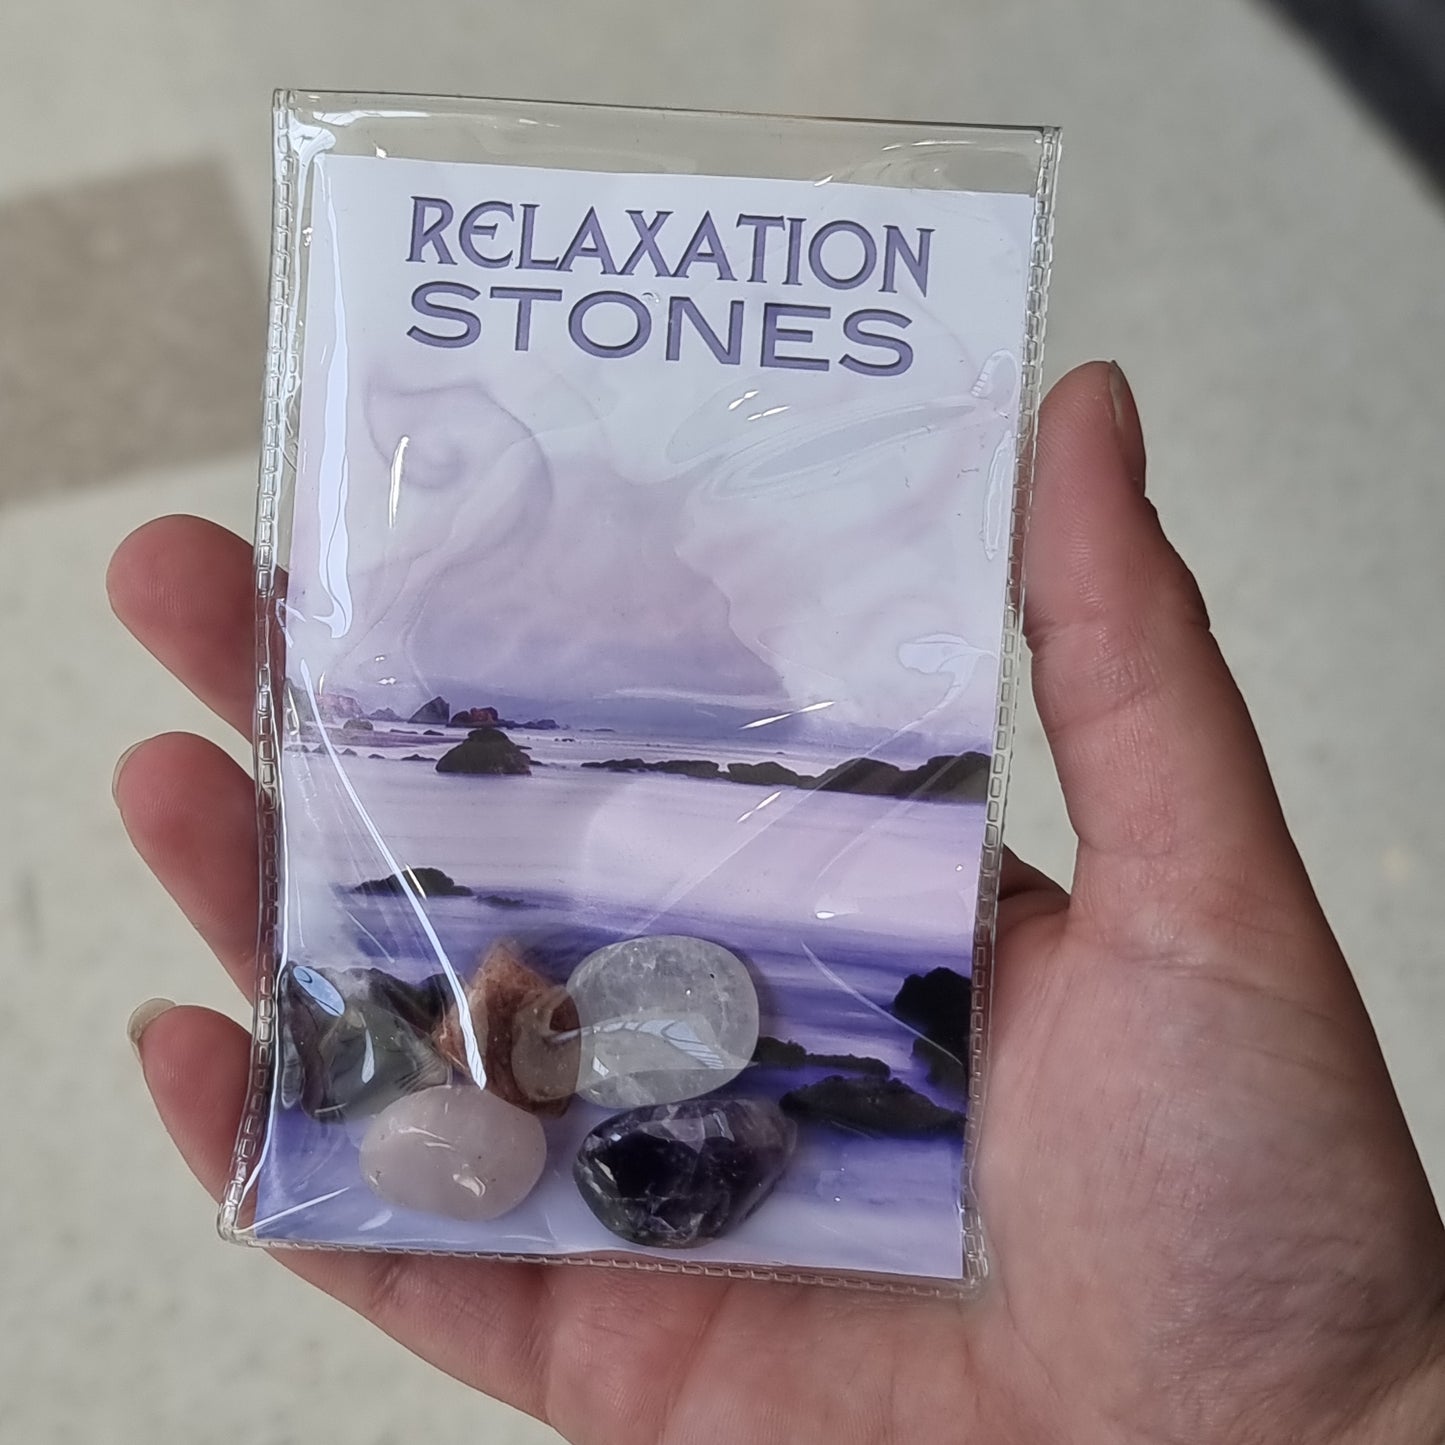 Relaxation stones - Rivendell Shop